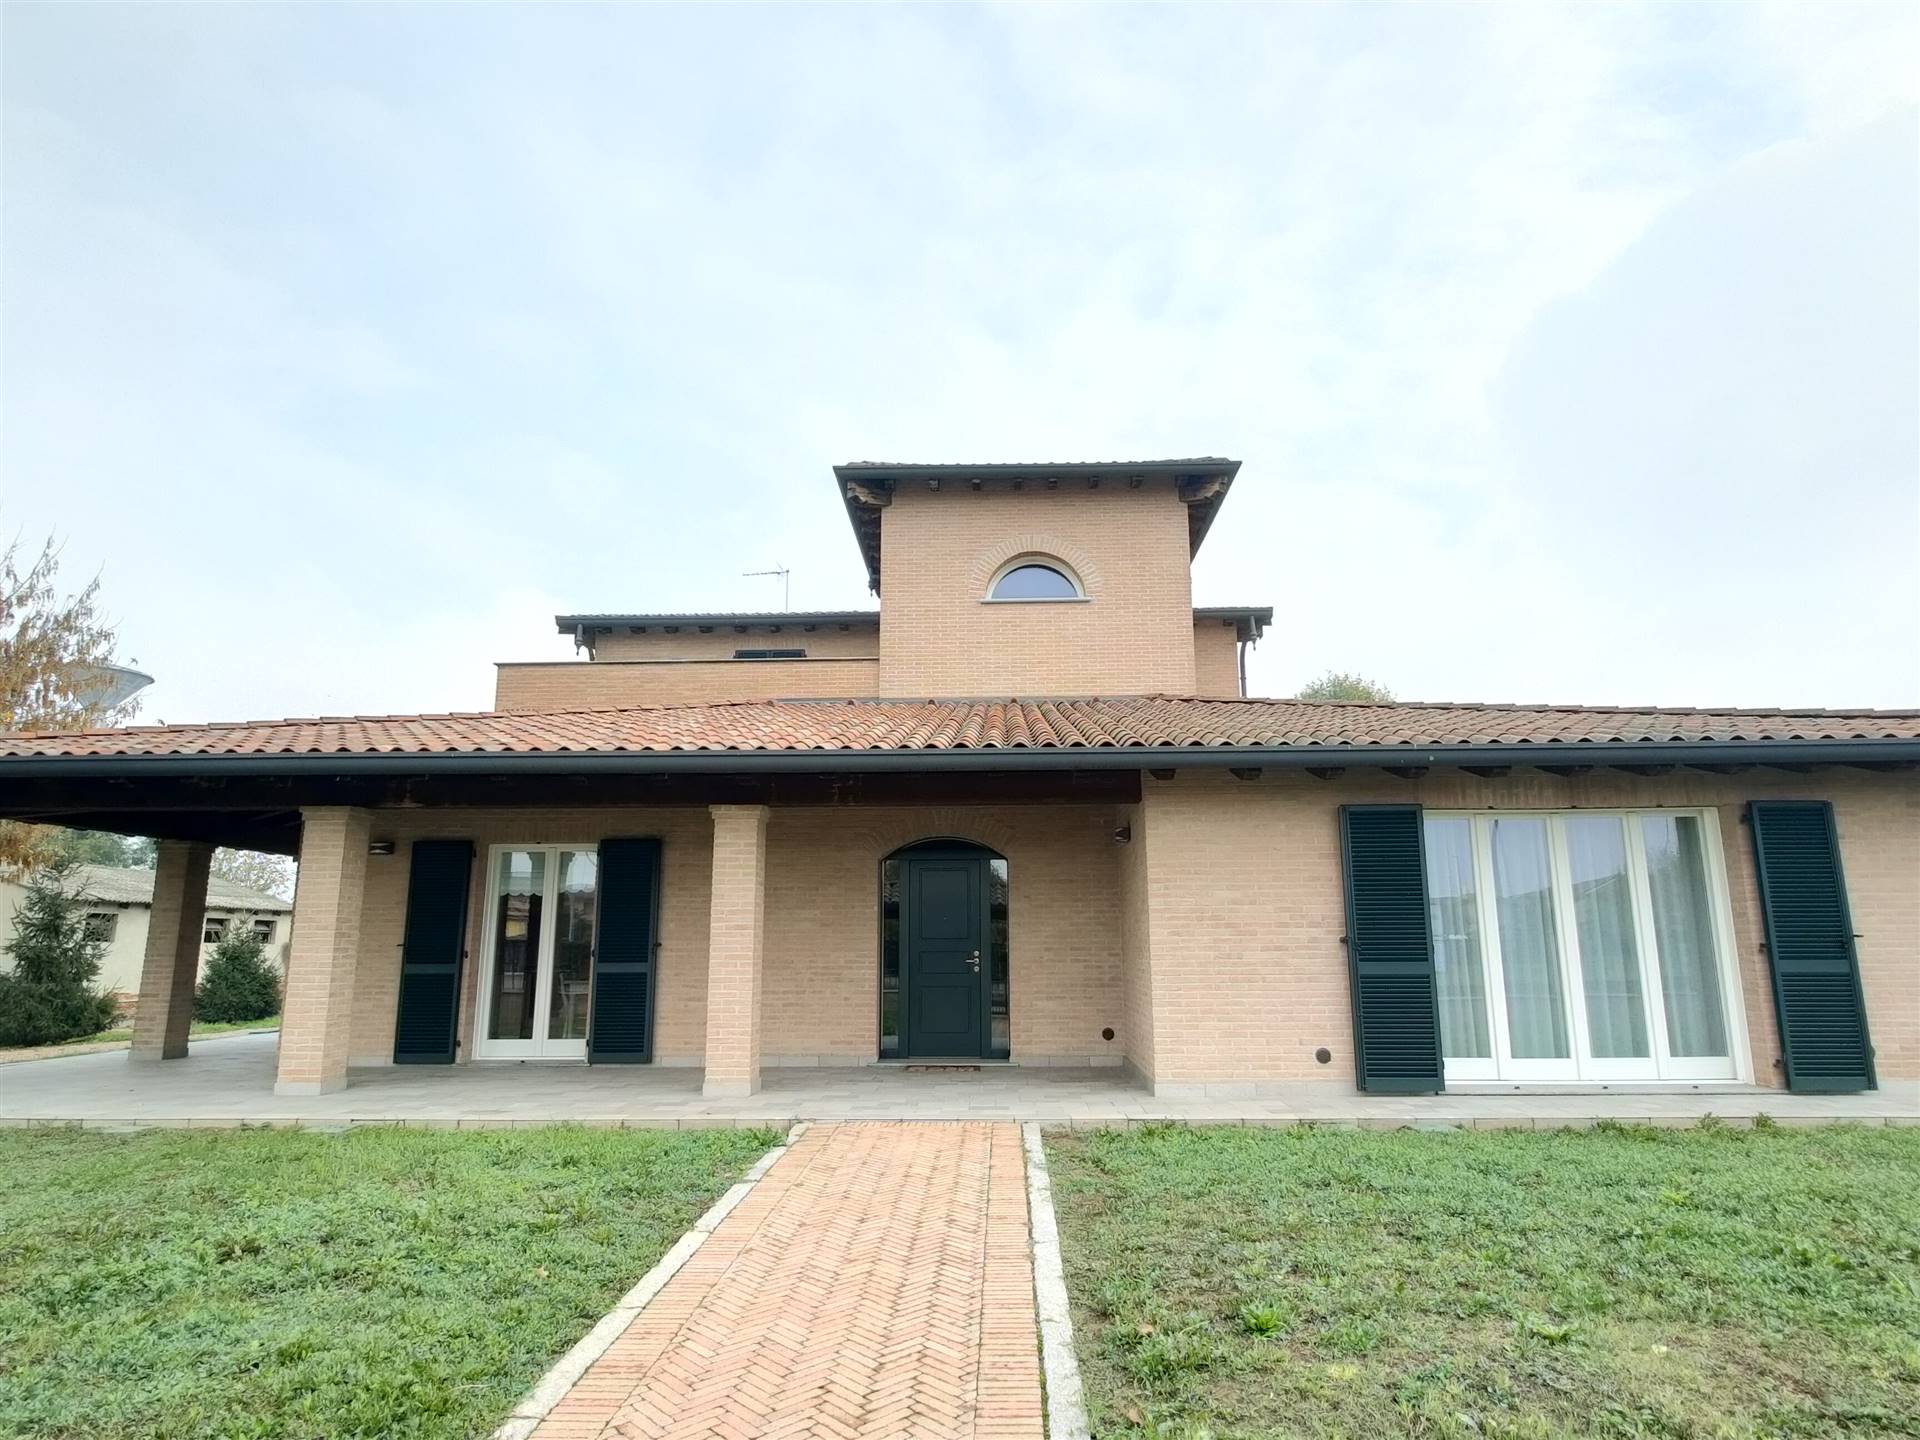 TERRANOVA DEI PASSERINI, Villa for sale of 235 Sq. mt., Almost new, Heating To floor, Energetic class: A2, placed at 1°, composed by: 7 Rooms, 